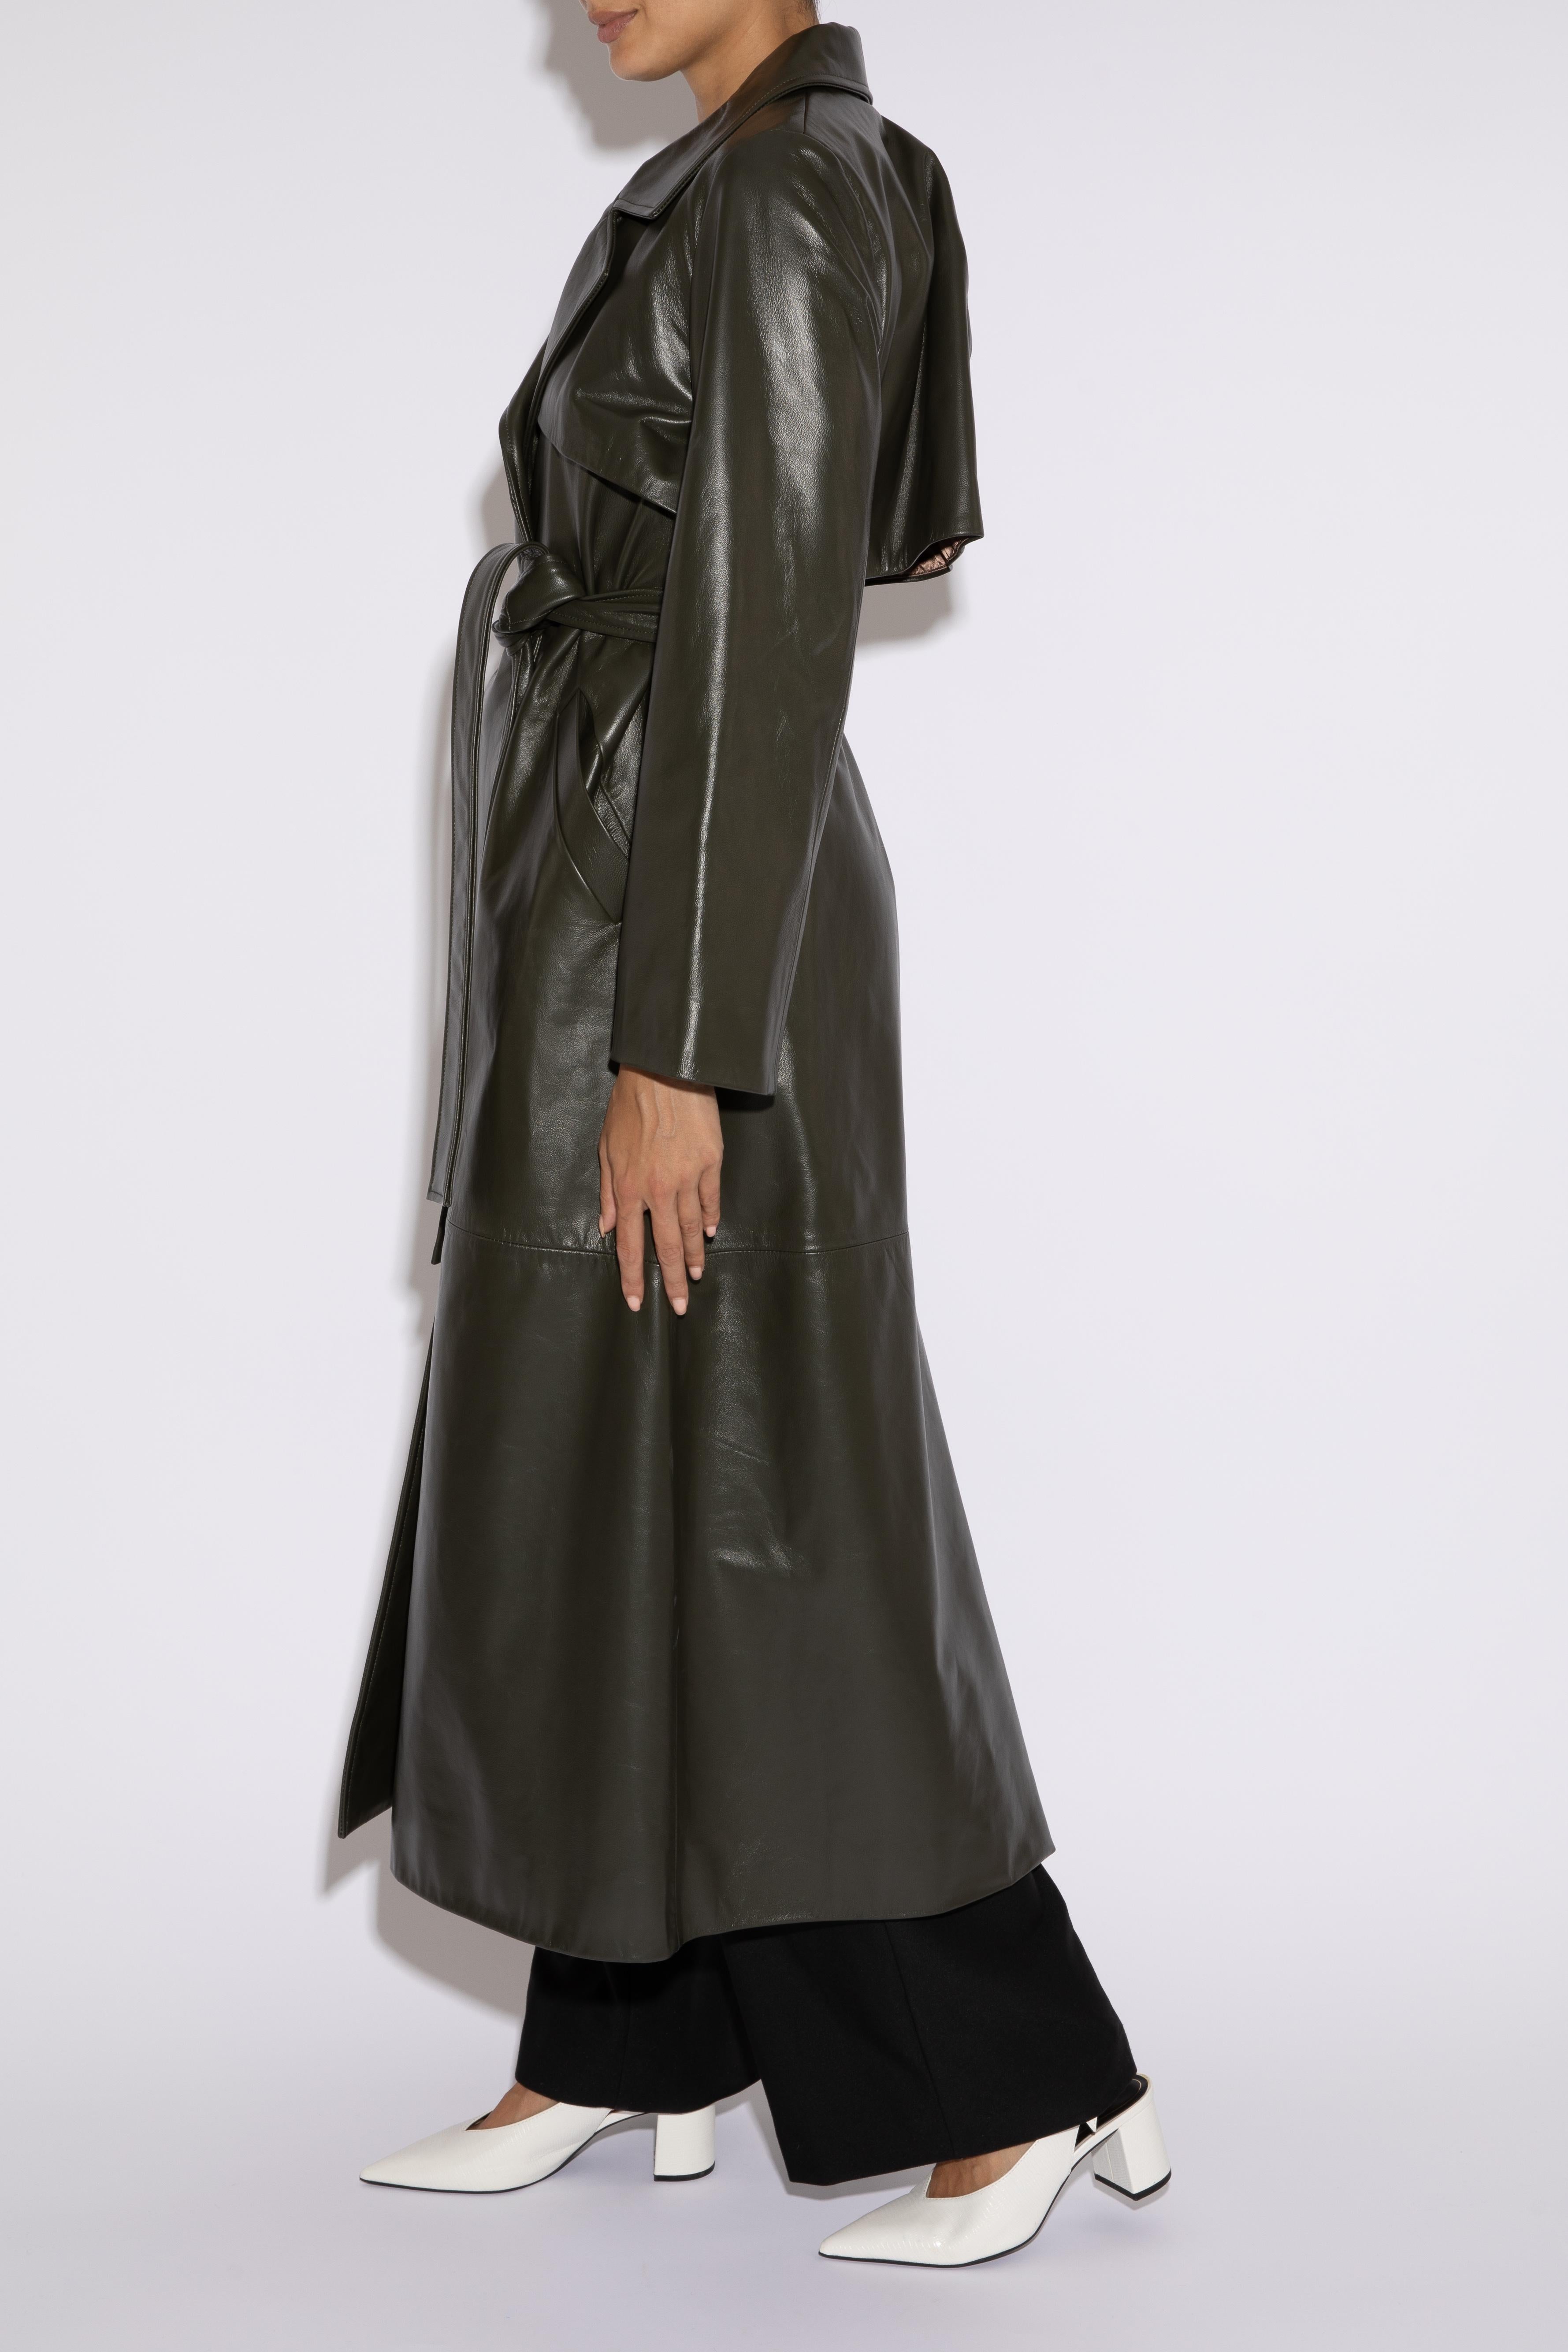 Verheyen London Leather Trench Coat in Dark Khaki Green - Size uk 8

Handmade in London, made with 100% Italian Lambs Leather this luxury item is an investment piece to wear for a lifetime.  This piece is made by artisans in London, expert artisans